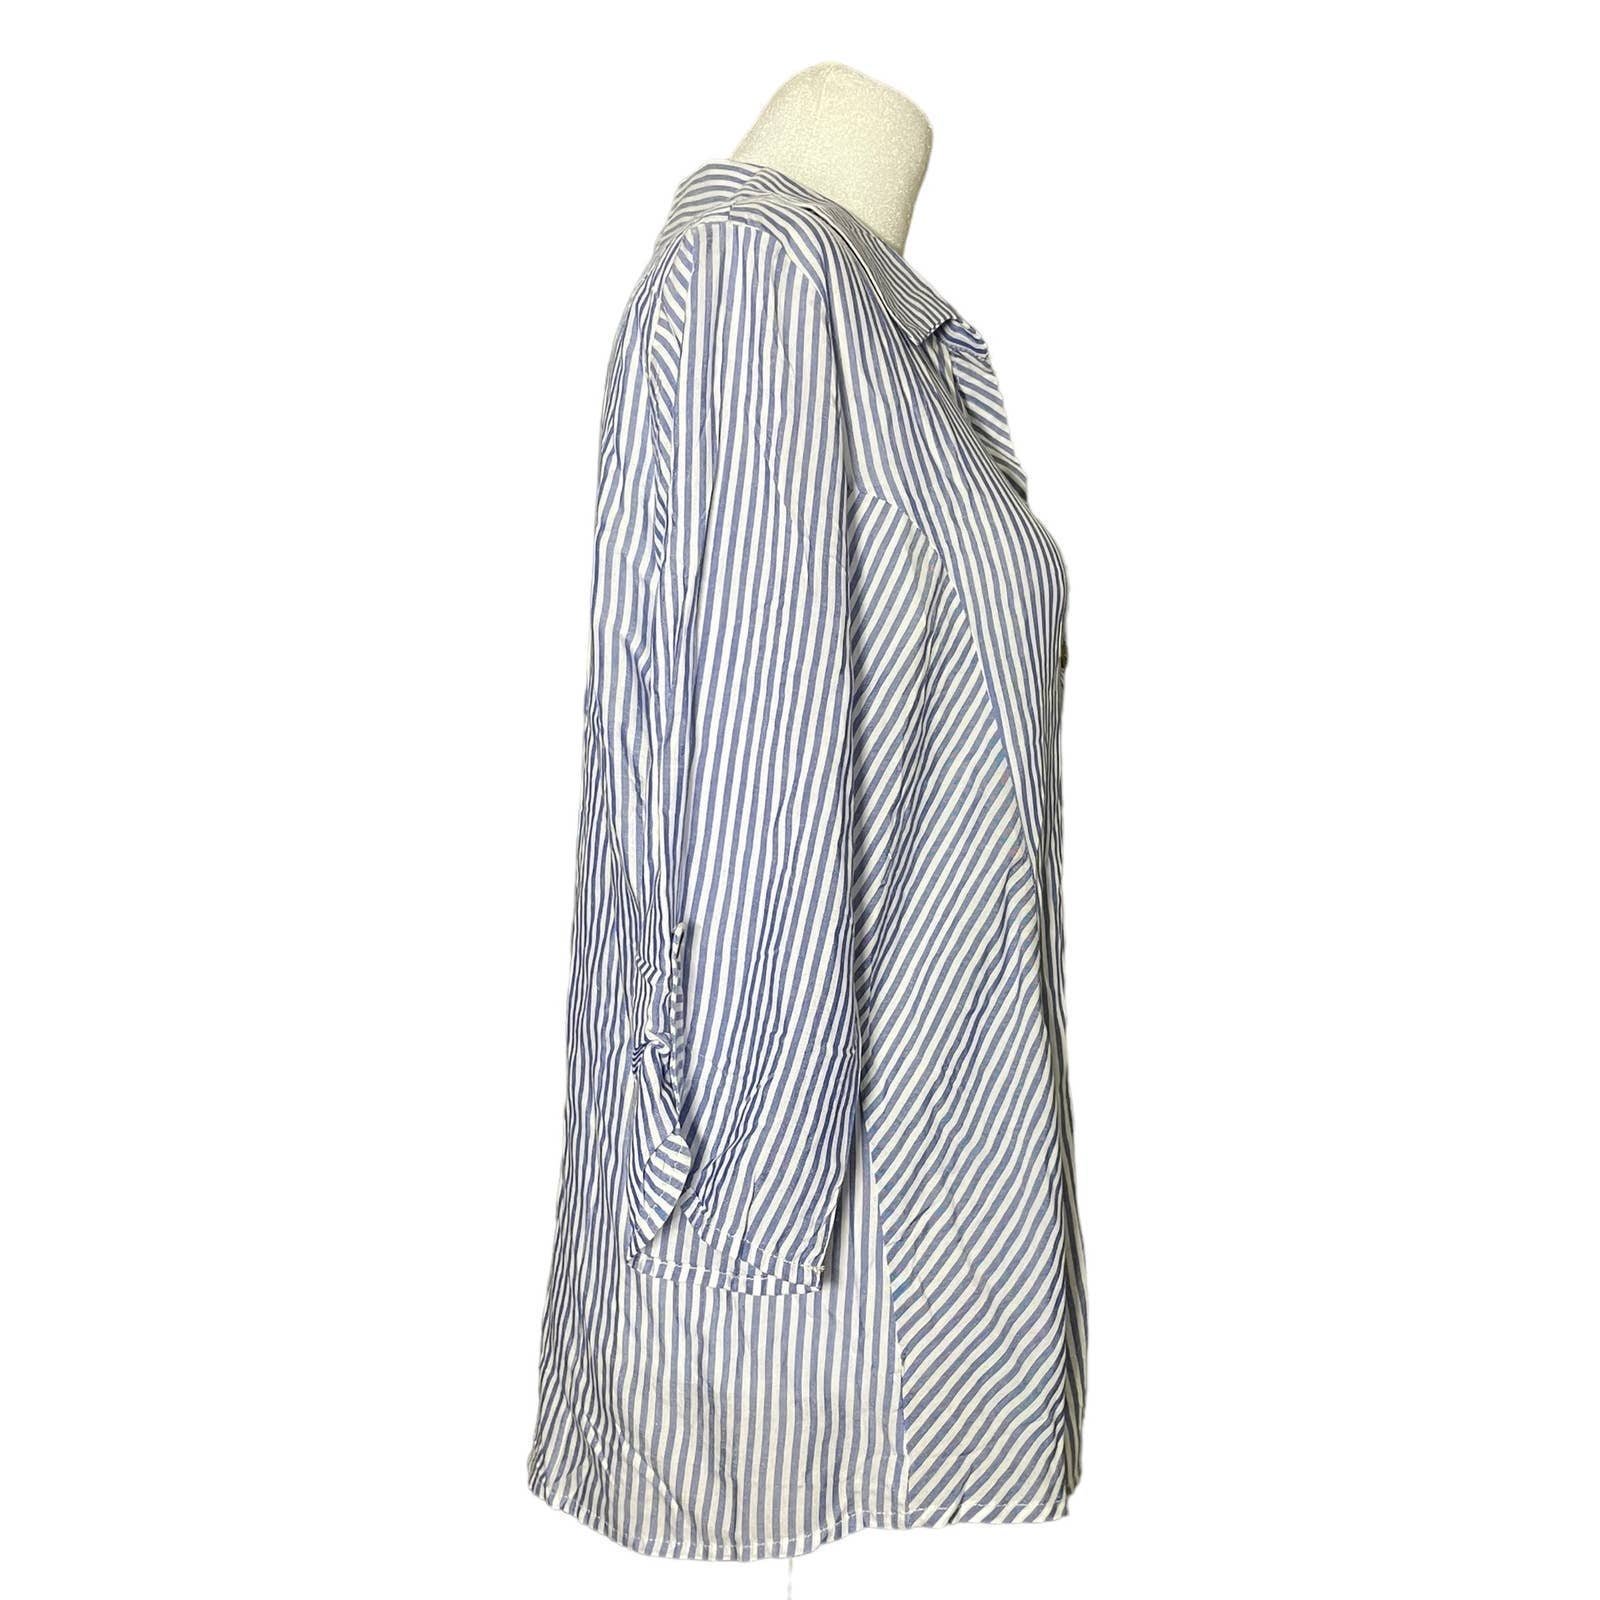 Authentic Naif Women´s Blue and White Striped Button-up Collared Blouse Sz Medium Petite fy0ItlK6i Cheap